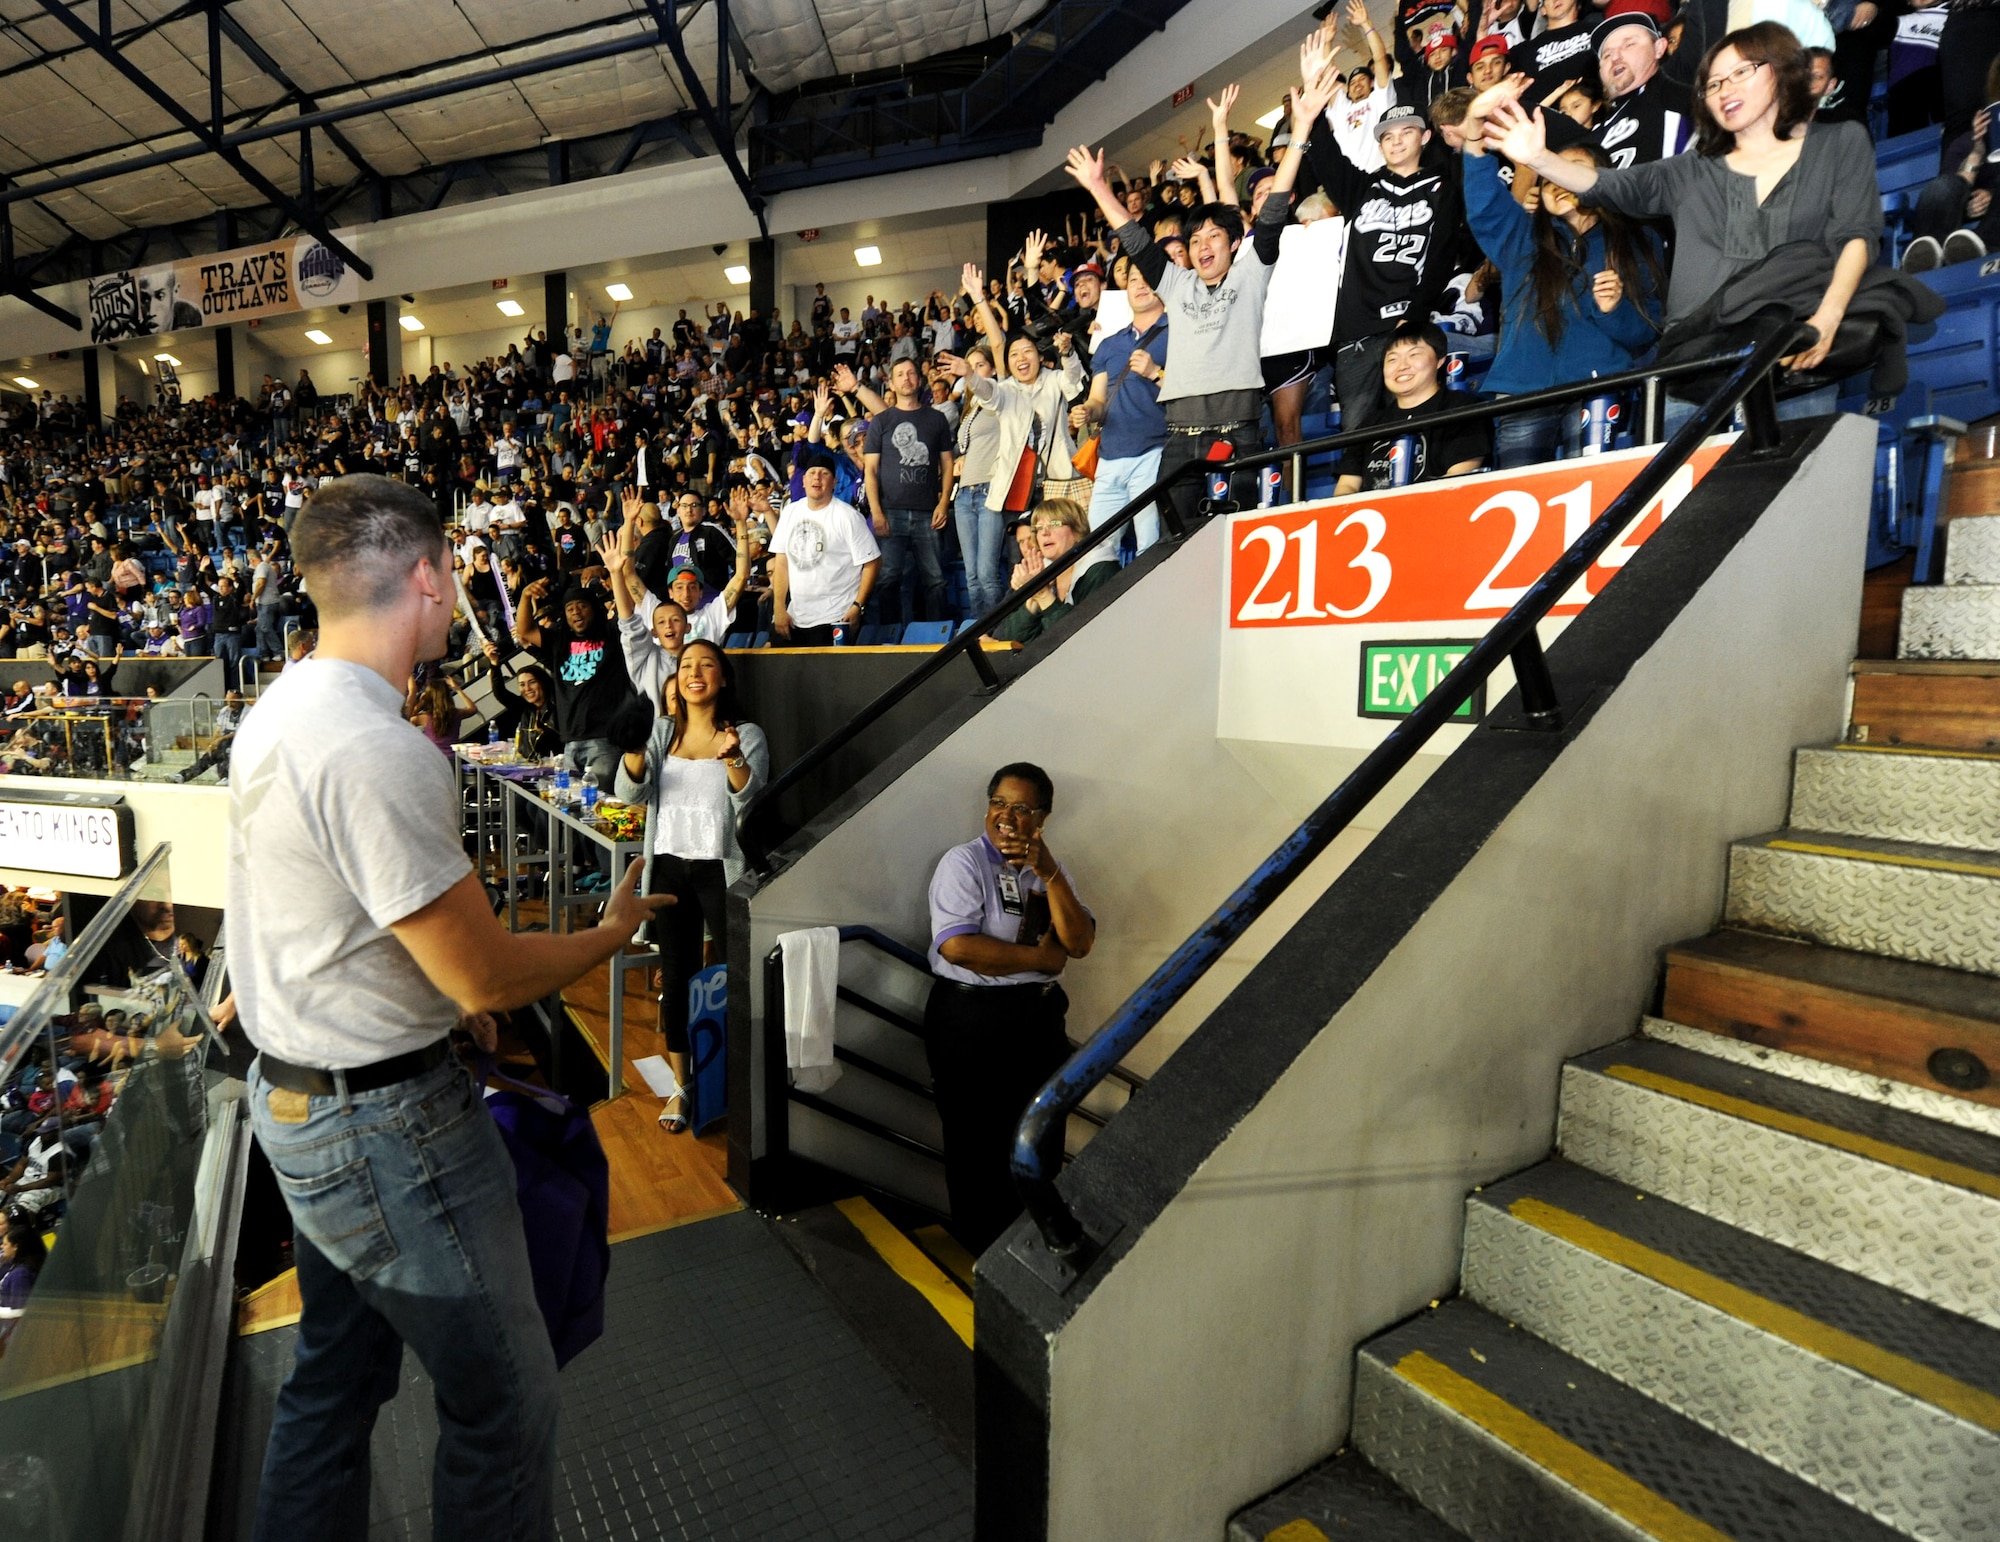 Airman 1st Class Charles Schatzle (left), 9th Civil Engineering Squadron firefighter, tosses a free T-shirt to a lucky fan at the Sleep Train Arena during the Sacramento Kings vs. L.A. Clippers game April 17, 2013. Schatzle and other Beale Airmen volunteered to aid the Kings’ staff during fan appreciation night. (U.S. Air Force photo by Airman 1st Class Bobby Cummings/Released)